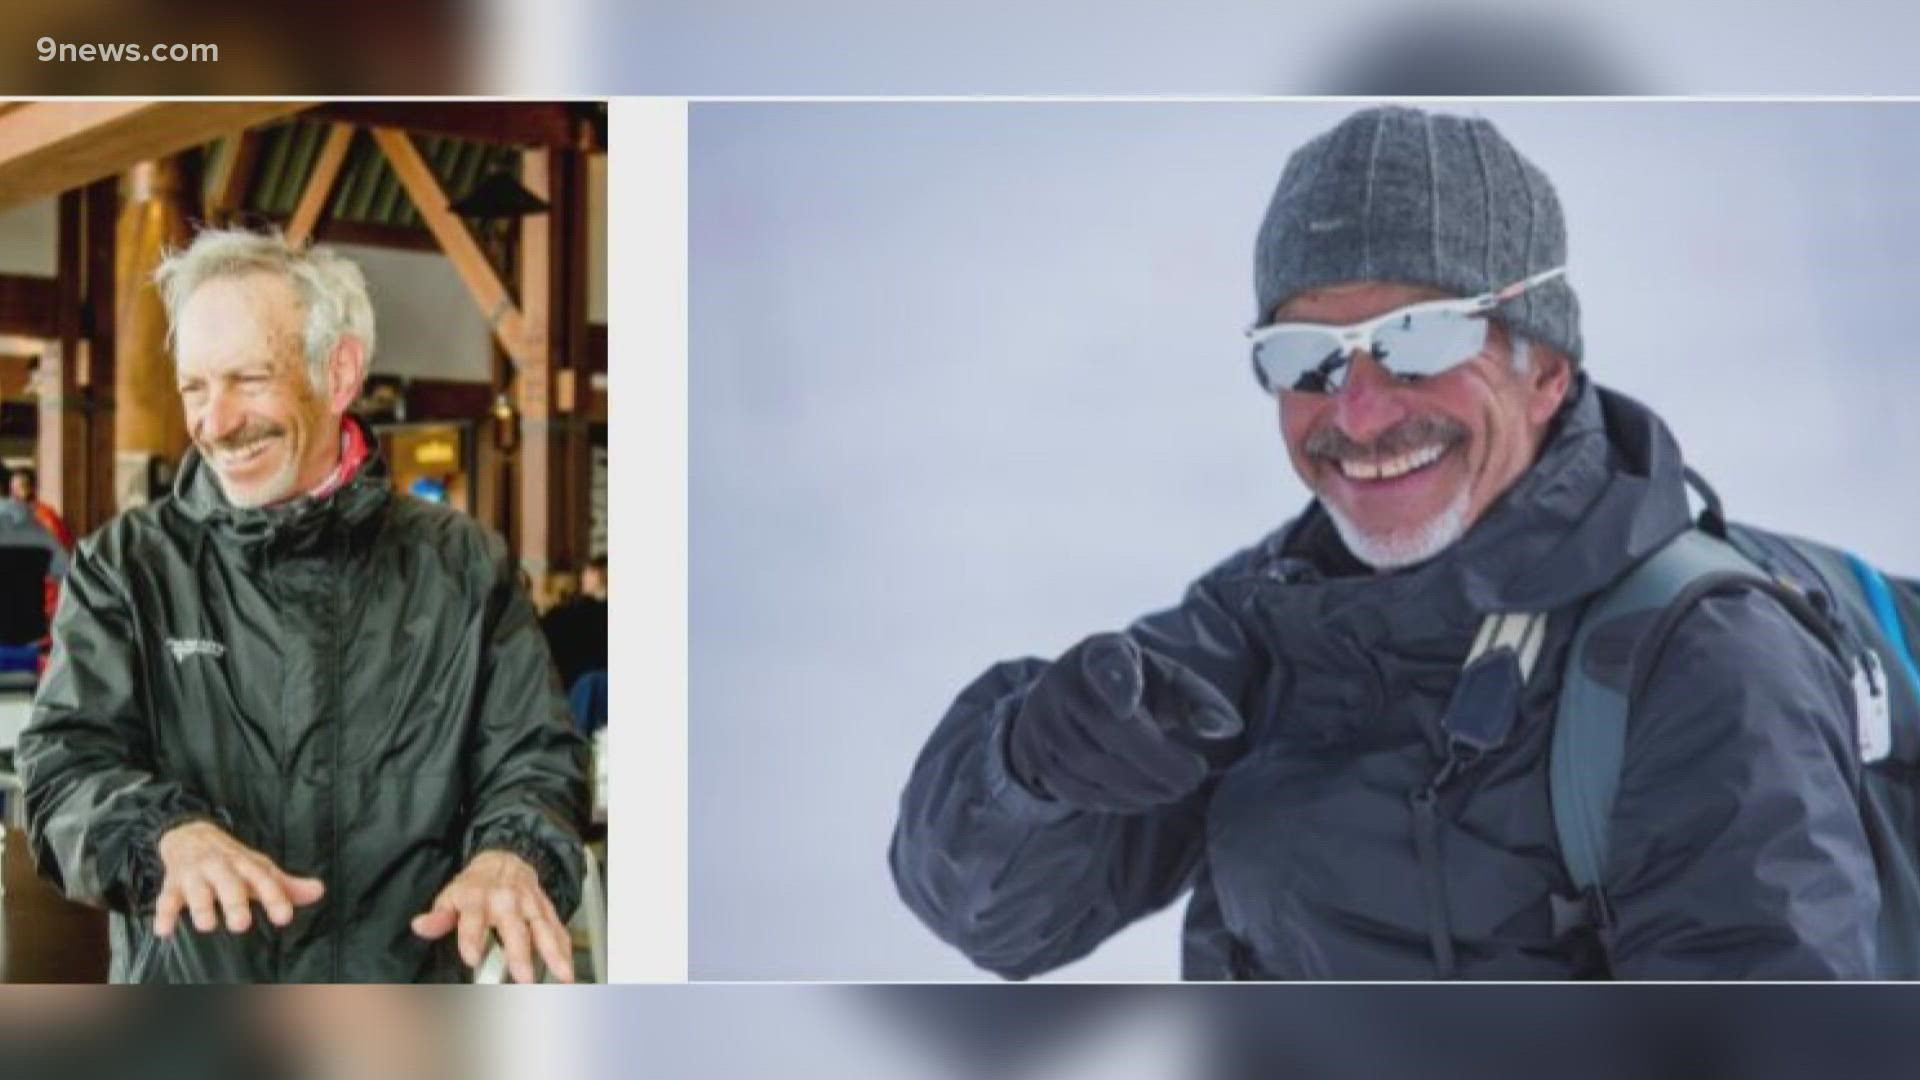 Ron LeMaster, 72, of Boulder, died after a collision with a snowboarder.